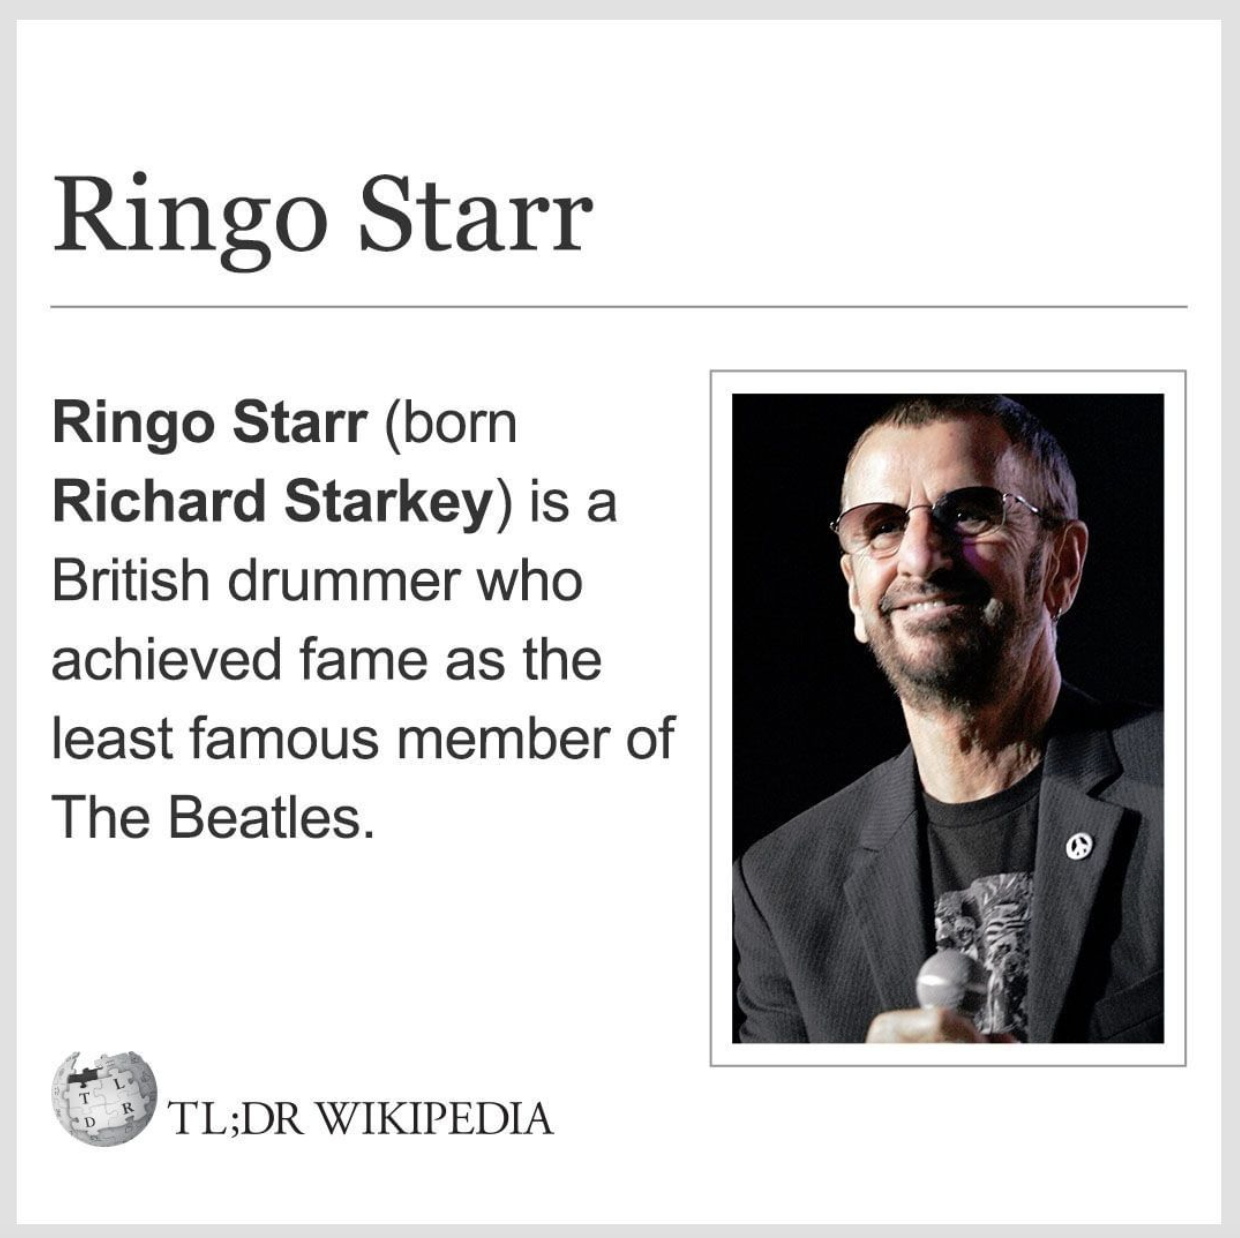 Wikipedia Memes - presentation - Ringo Starr Ringo Starr born Richard Starkey is a British drummer who achieved fame as the least famous member of The Beatles. 5 Tl;Dr Wikipedia